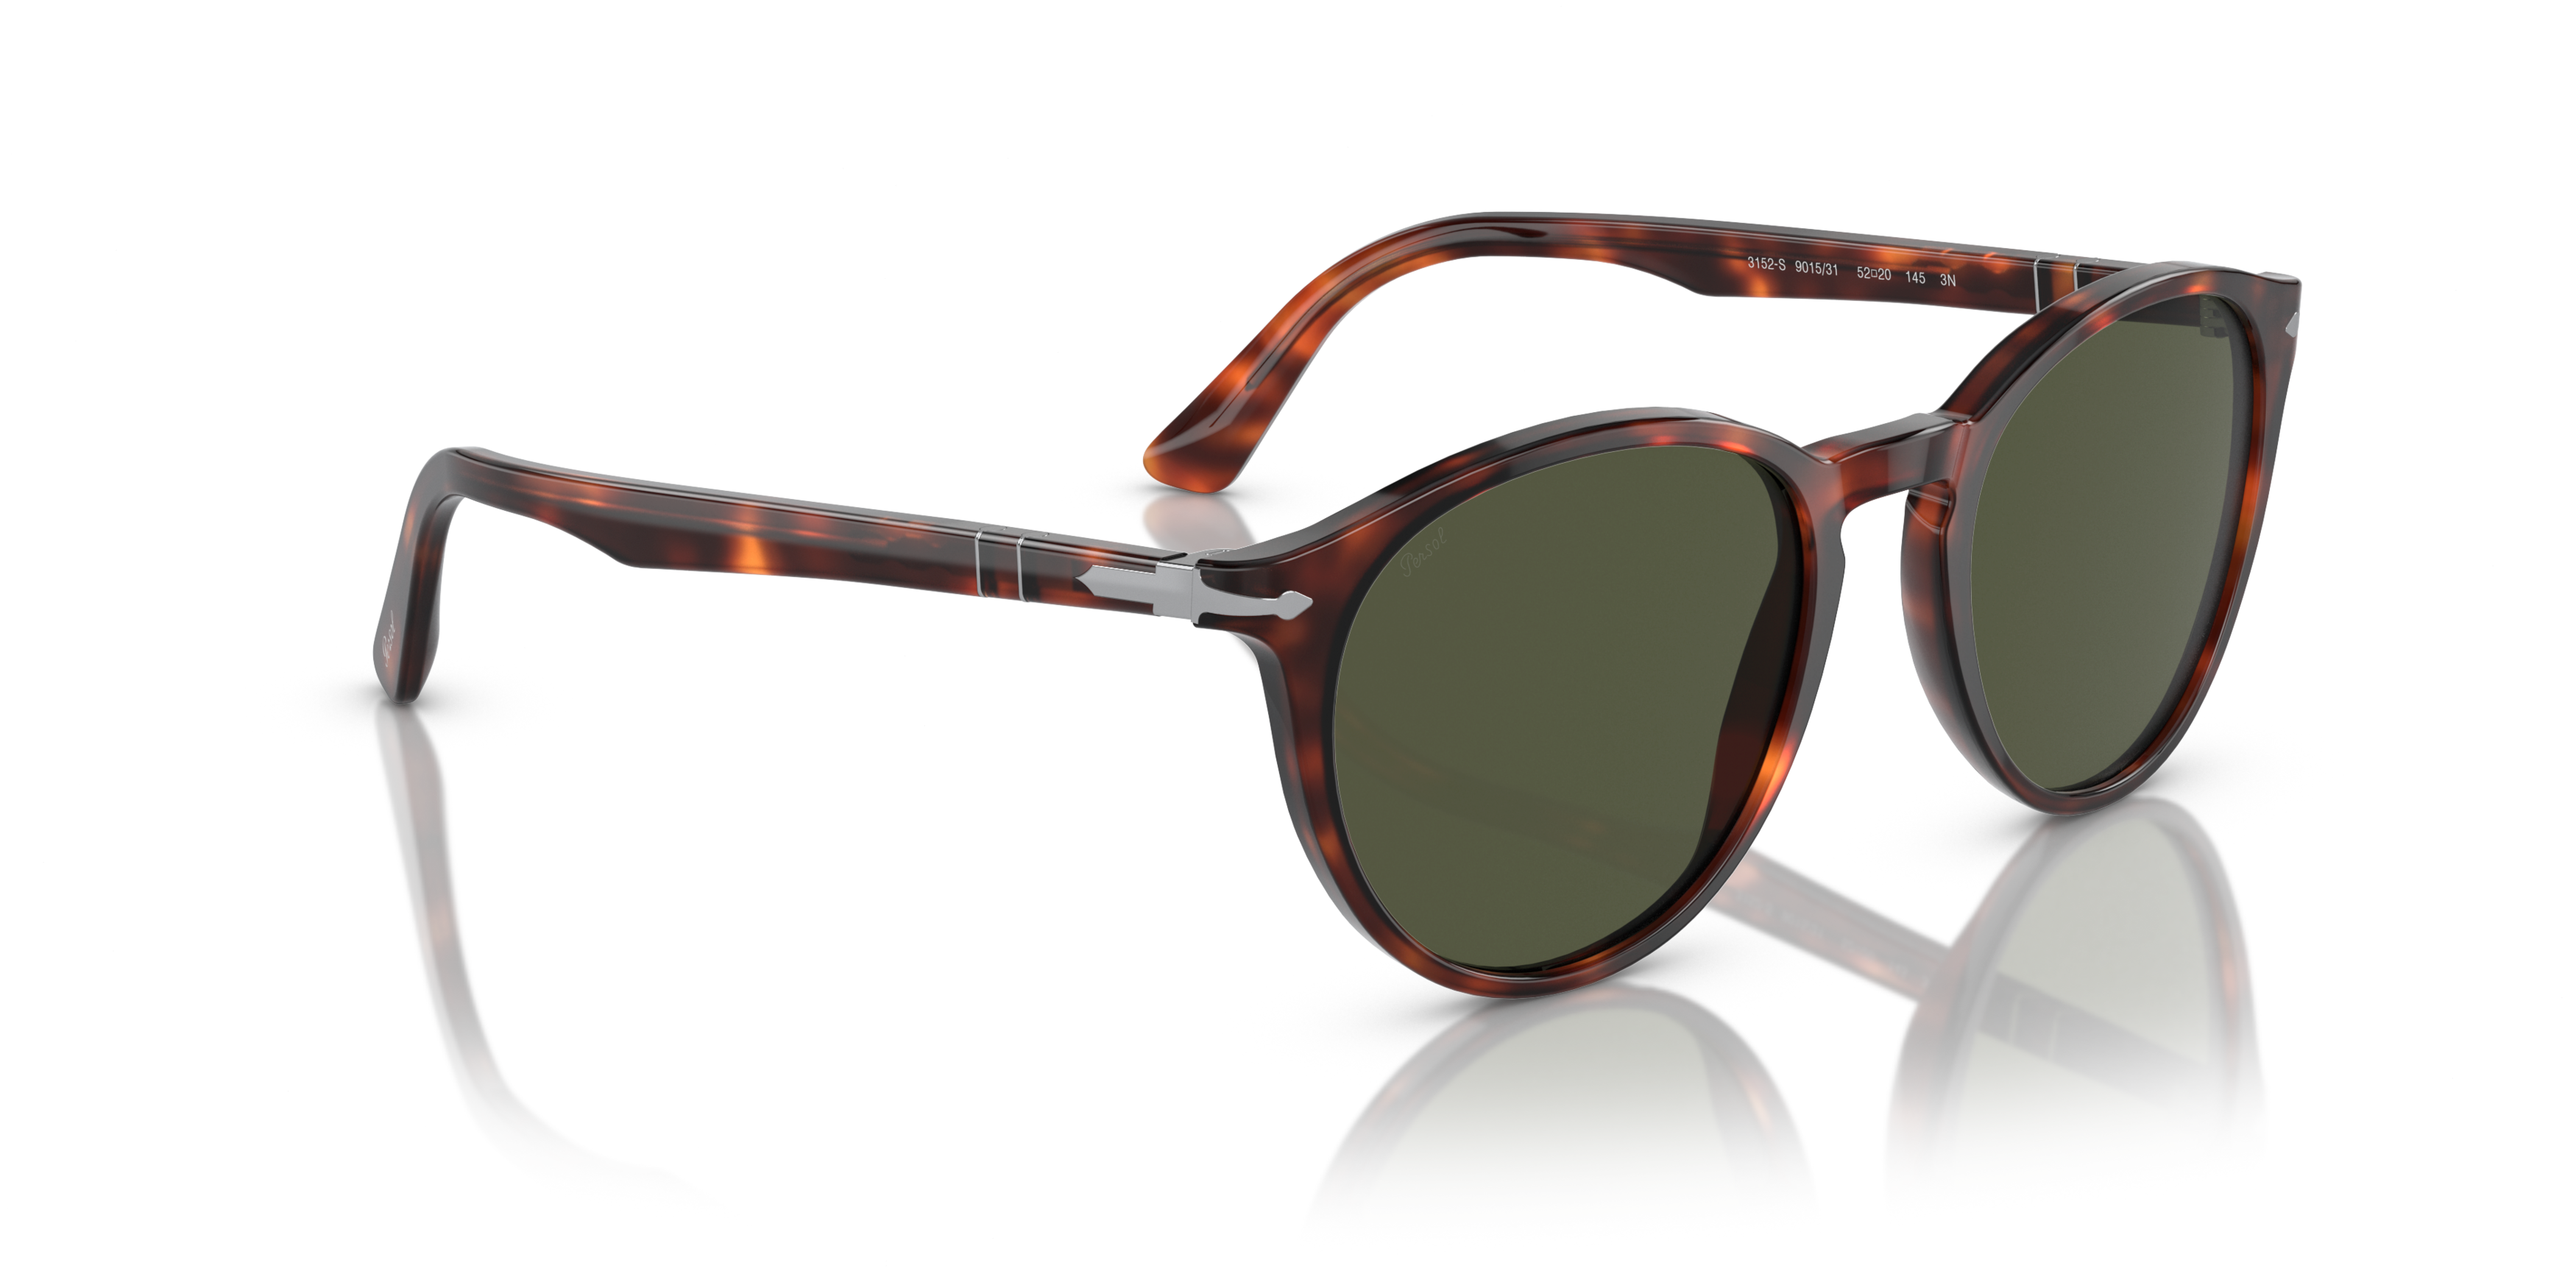 [products.image.angle_right01] Persol PO3152S 901531